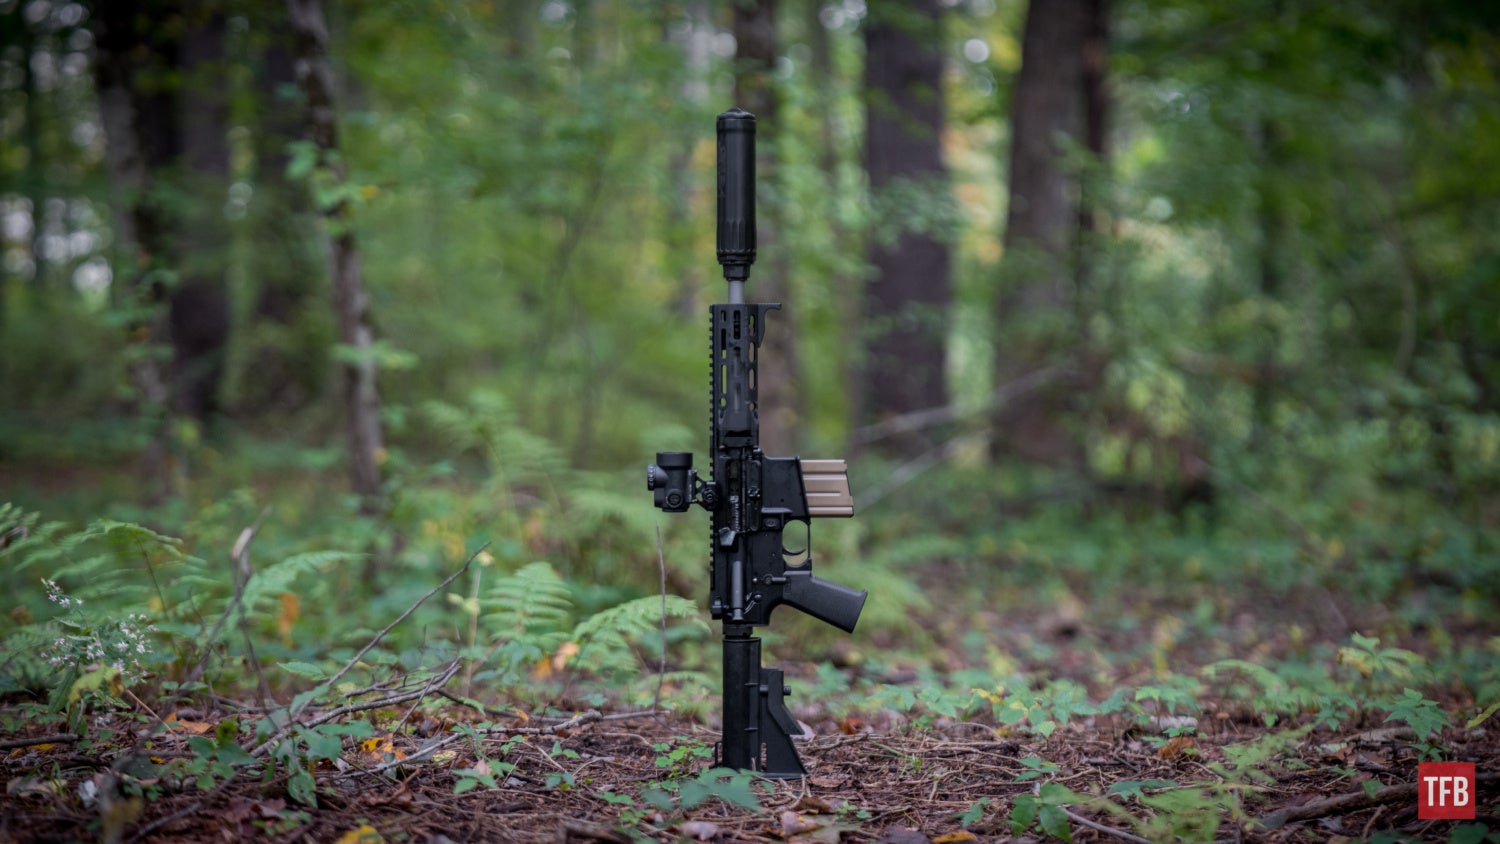 SILENCER SATURDAY 298: HUB and Flow with the HUXWRX VENTUM 762